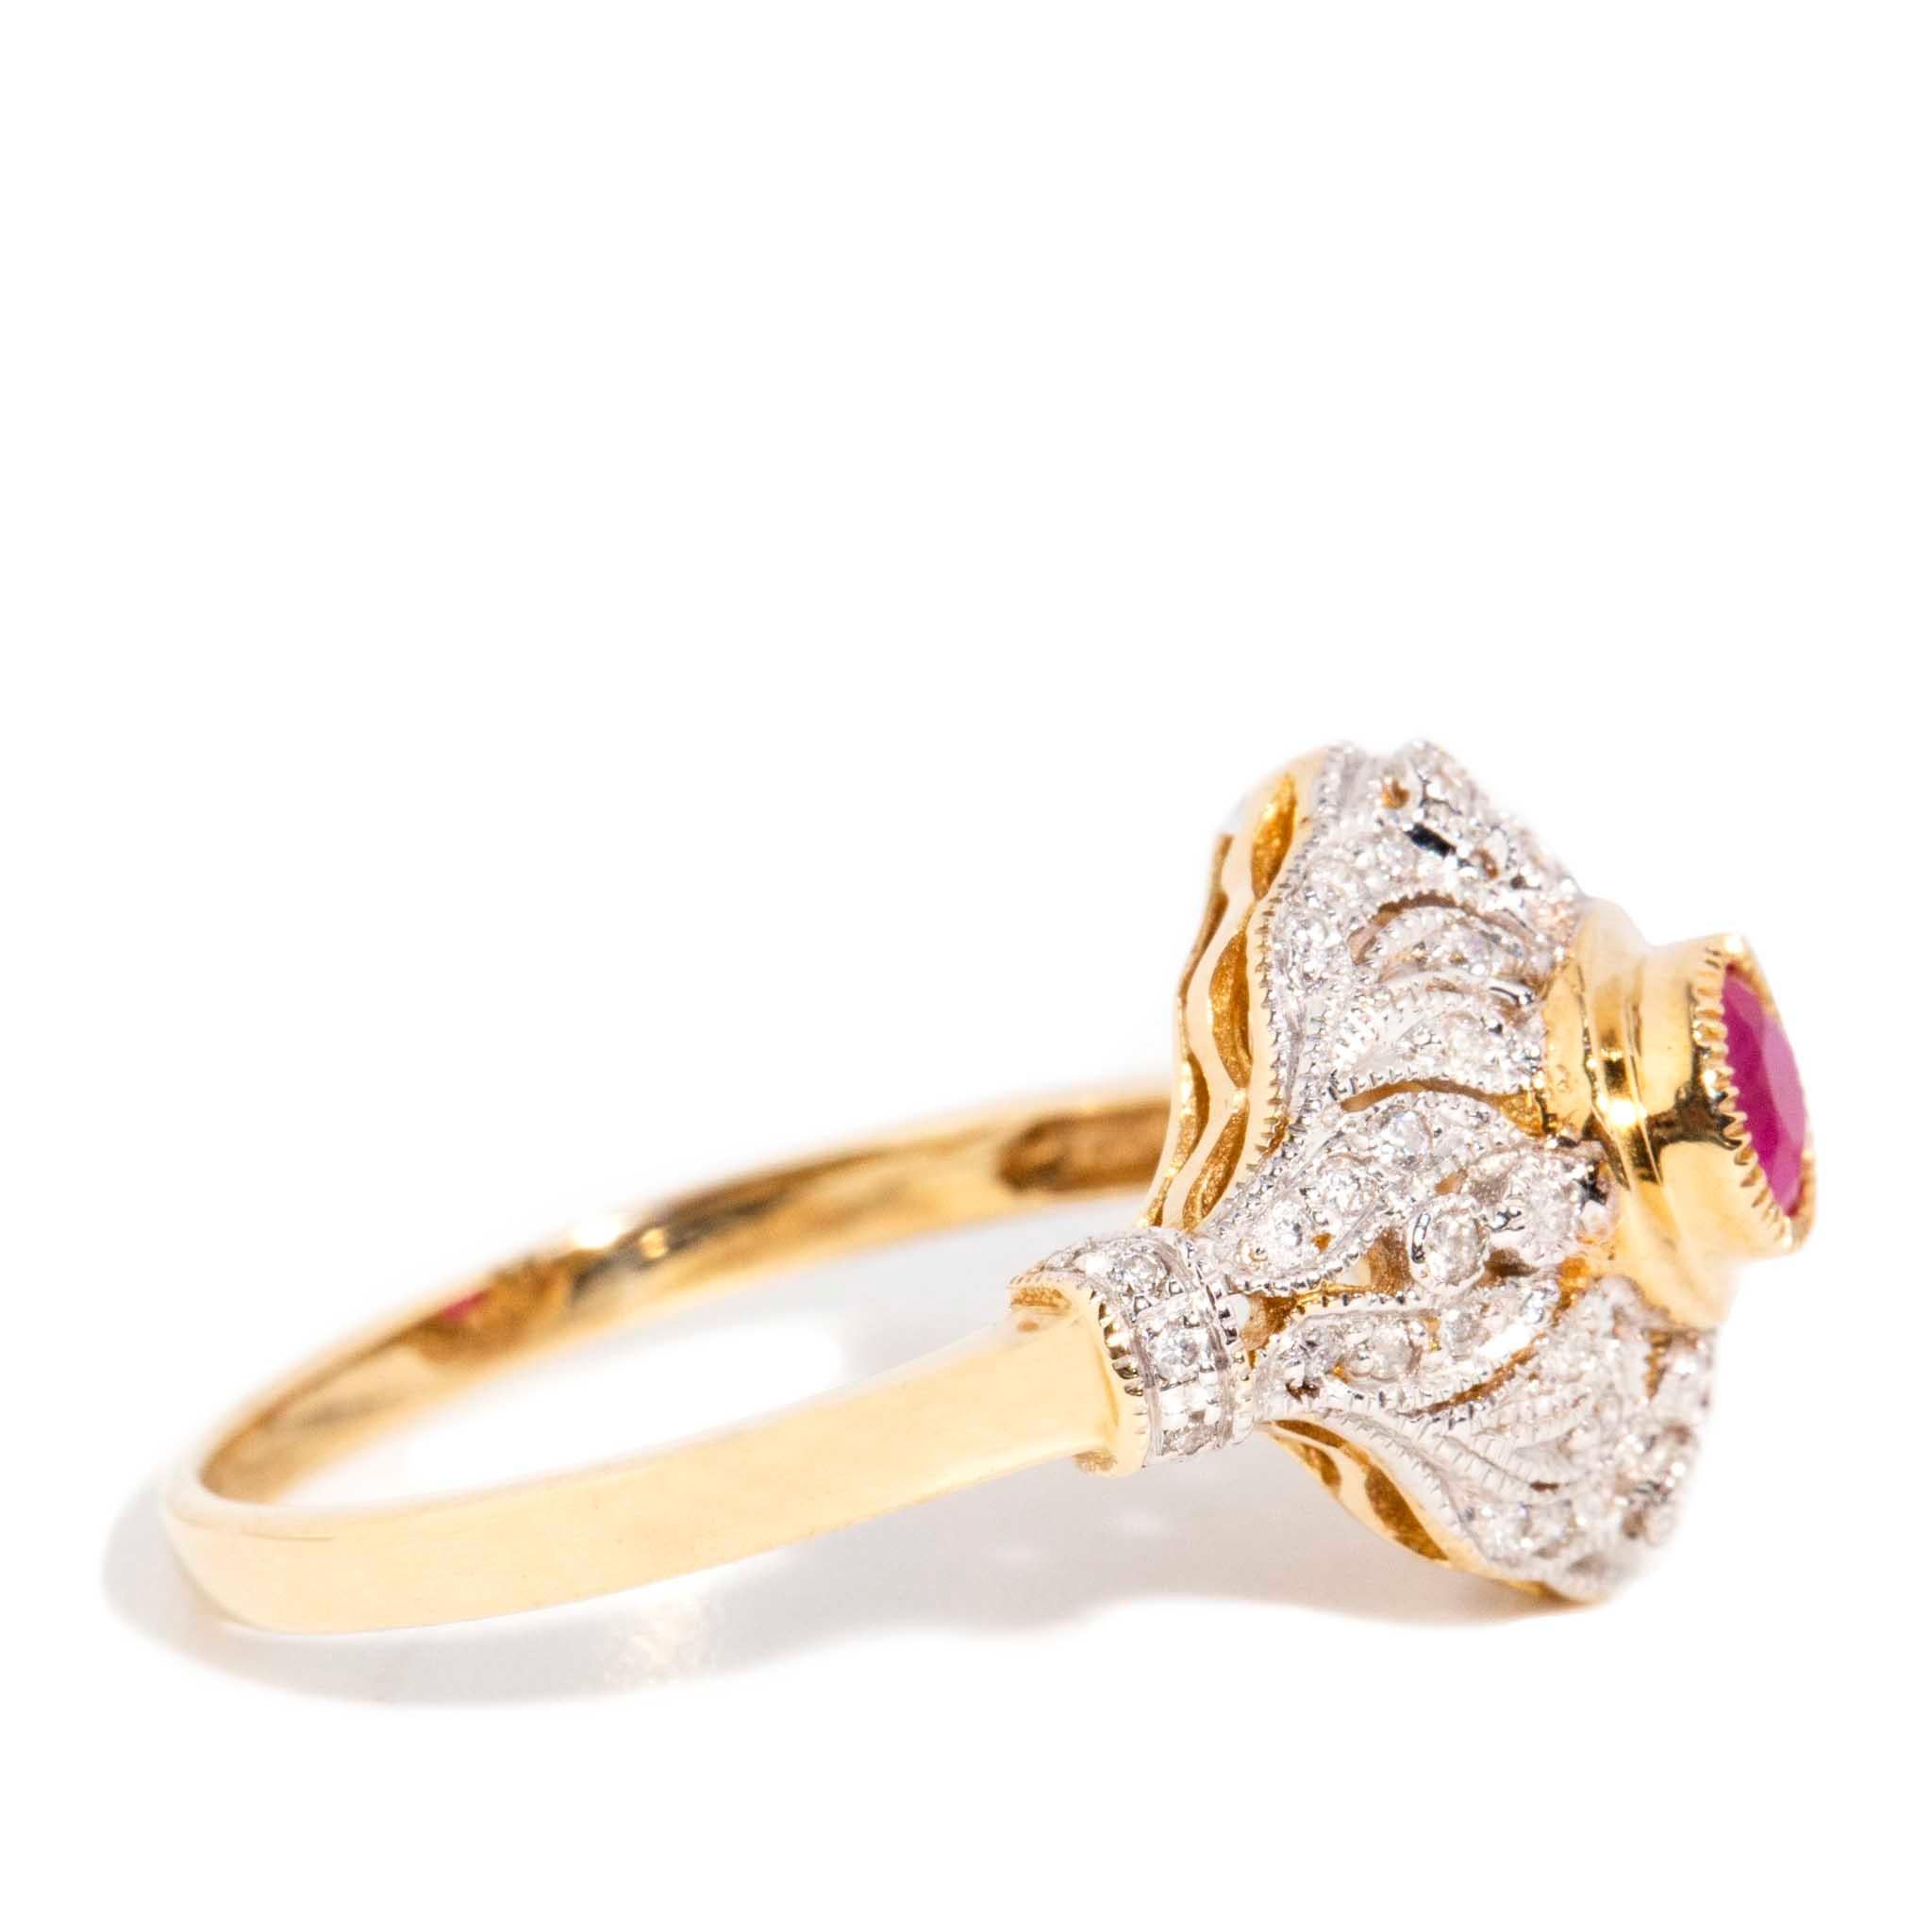 Women's Vintage Inspired Bright Red Ruby & Diamond Cluster Ring 9 Carat Yellow Gold For Sale